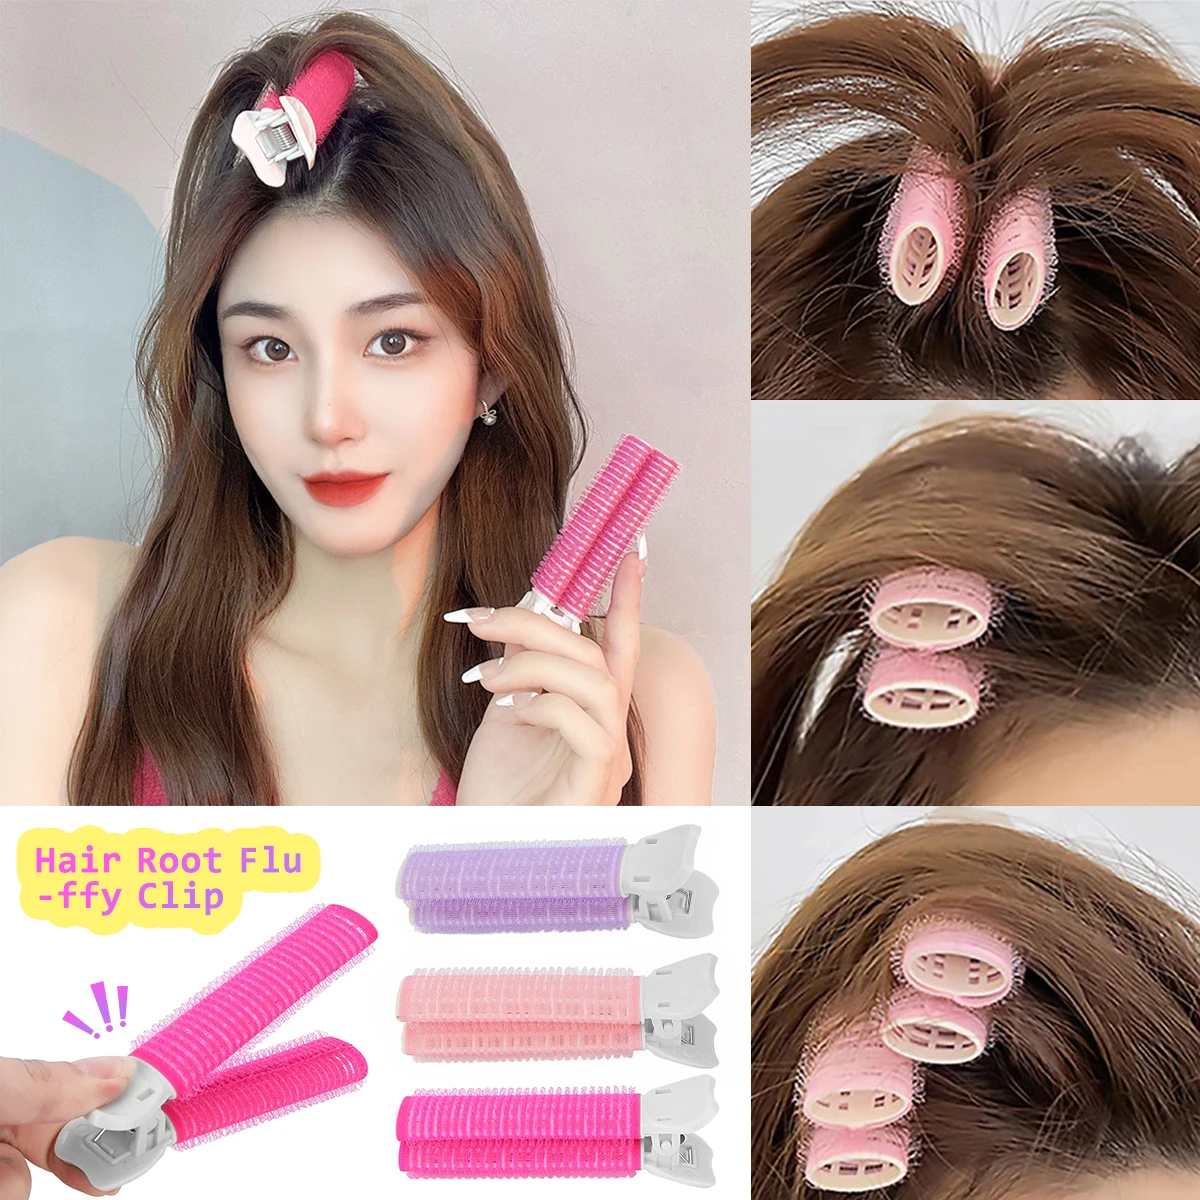 

2Pcs Hair Root Fluffy Clip Curly Stick Solid Color Air Bangs Curler Self-Adhesive Lazy Curling Clips for Girls Hair Styling Tool